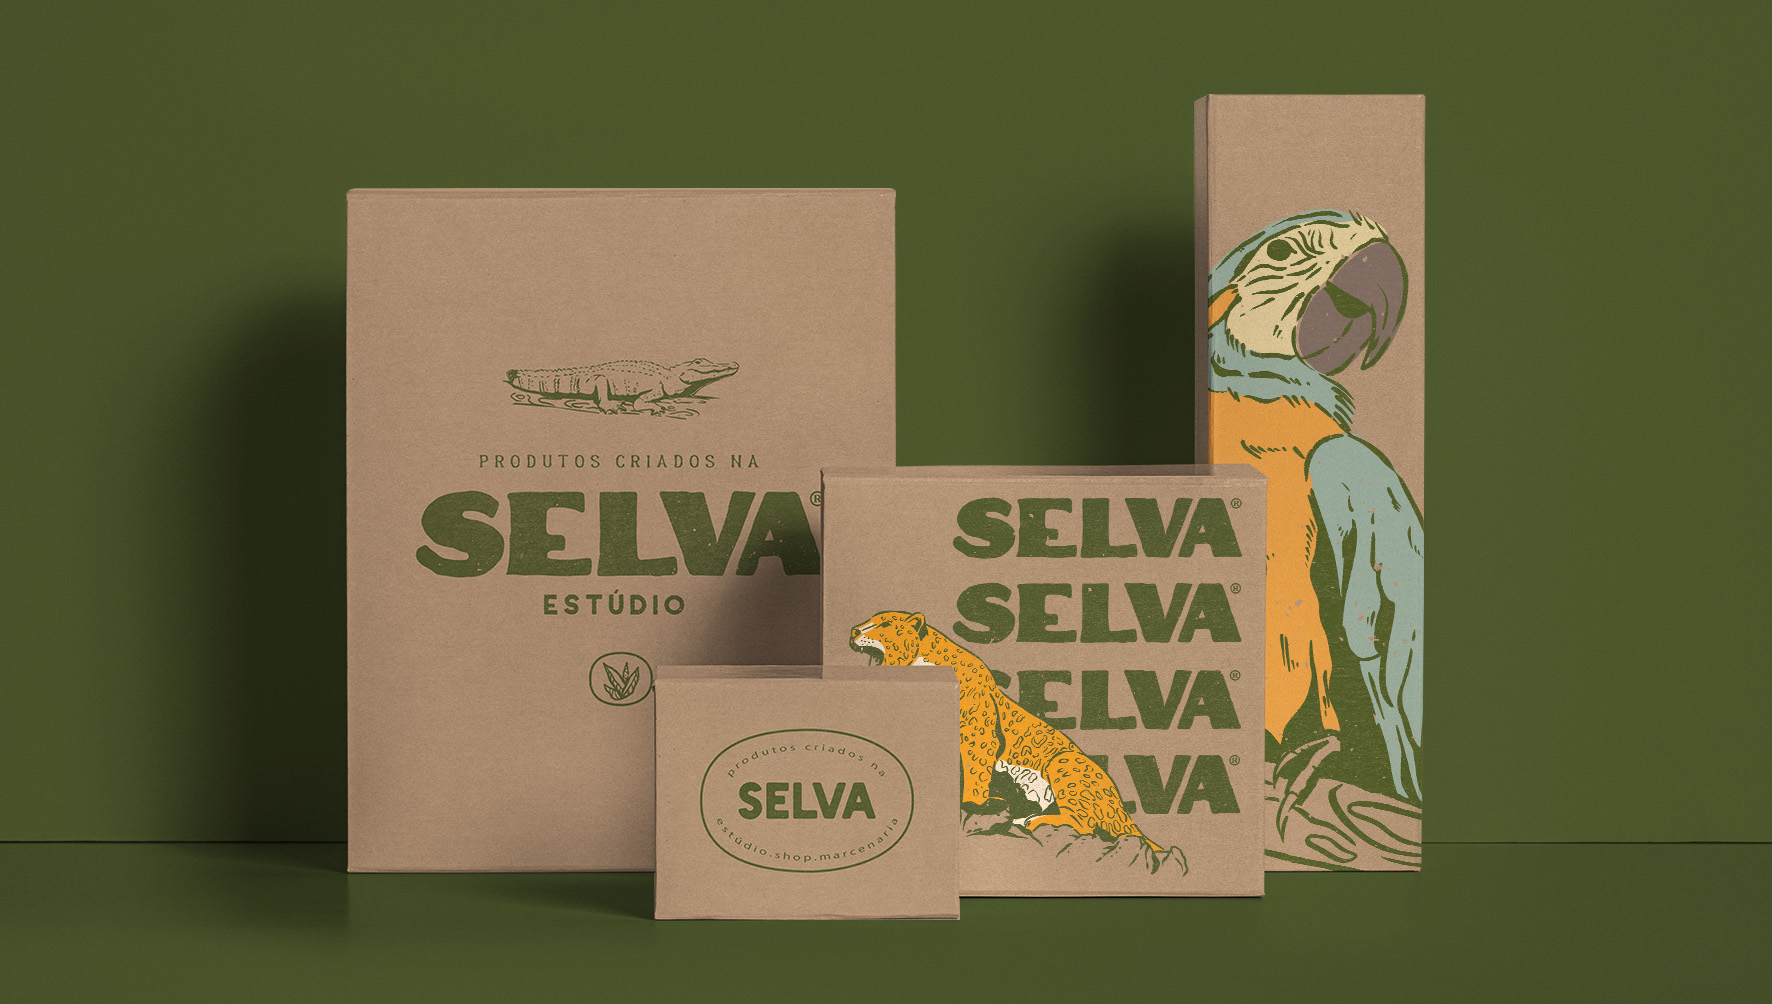 Artistry and Sustainability Branding for Selva Estúdio Handcrafted Furniture and Decor by Bigode Design